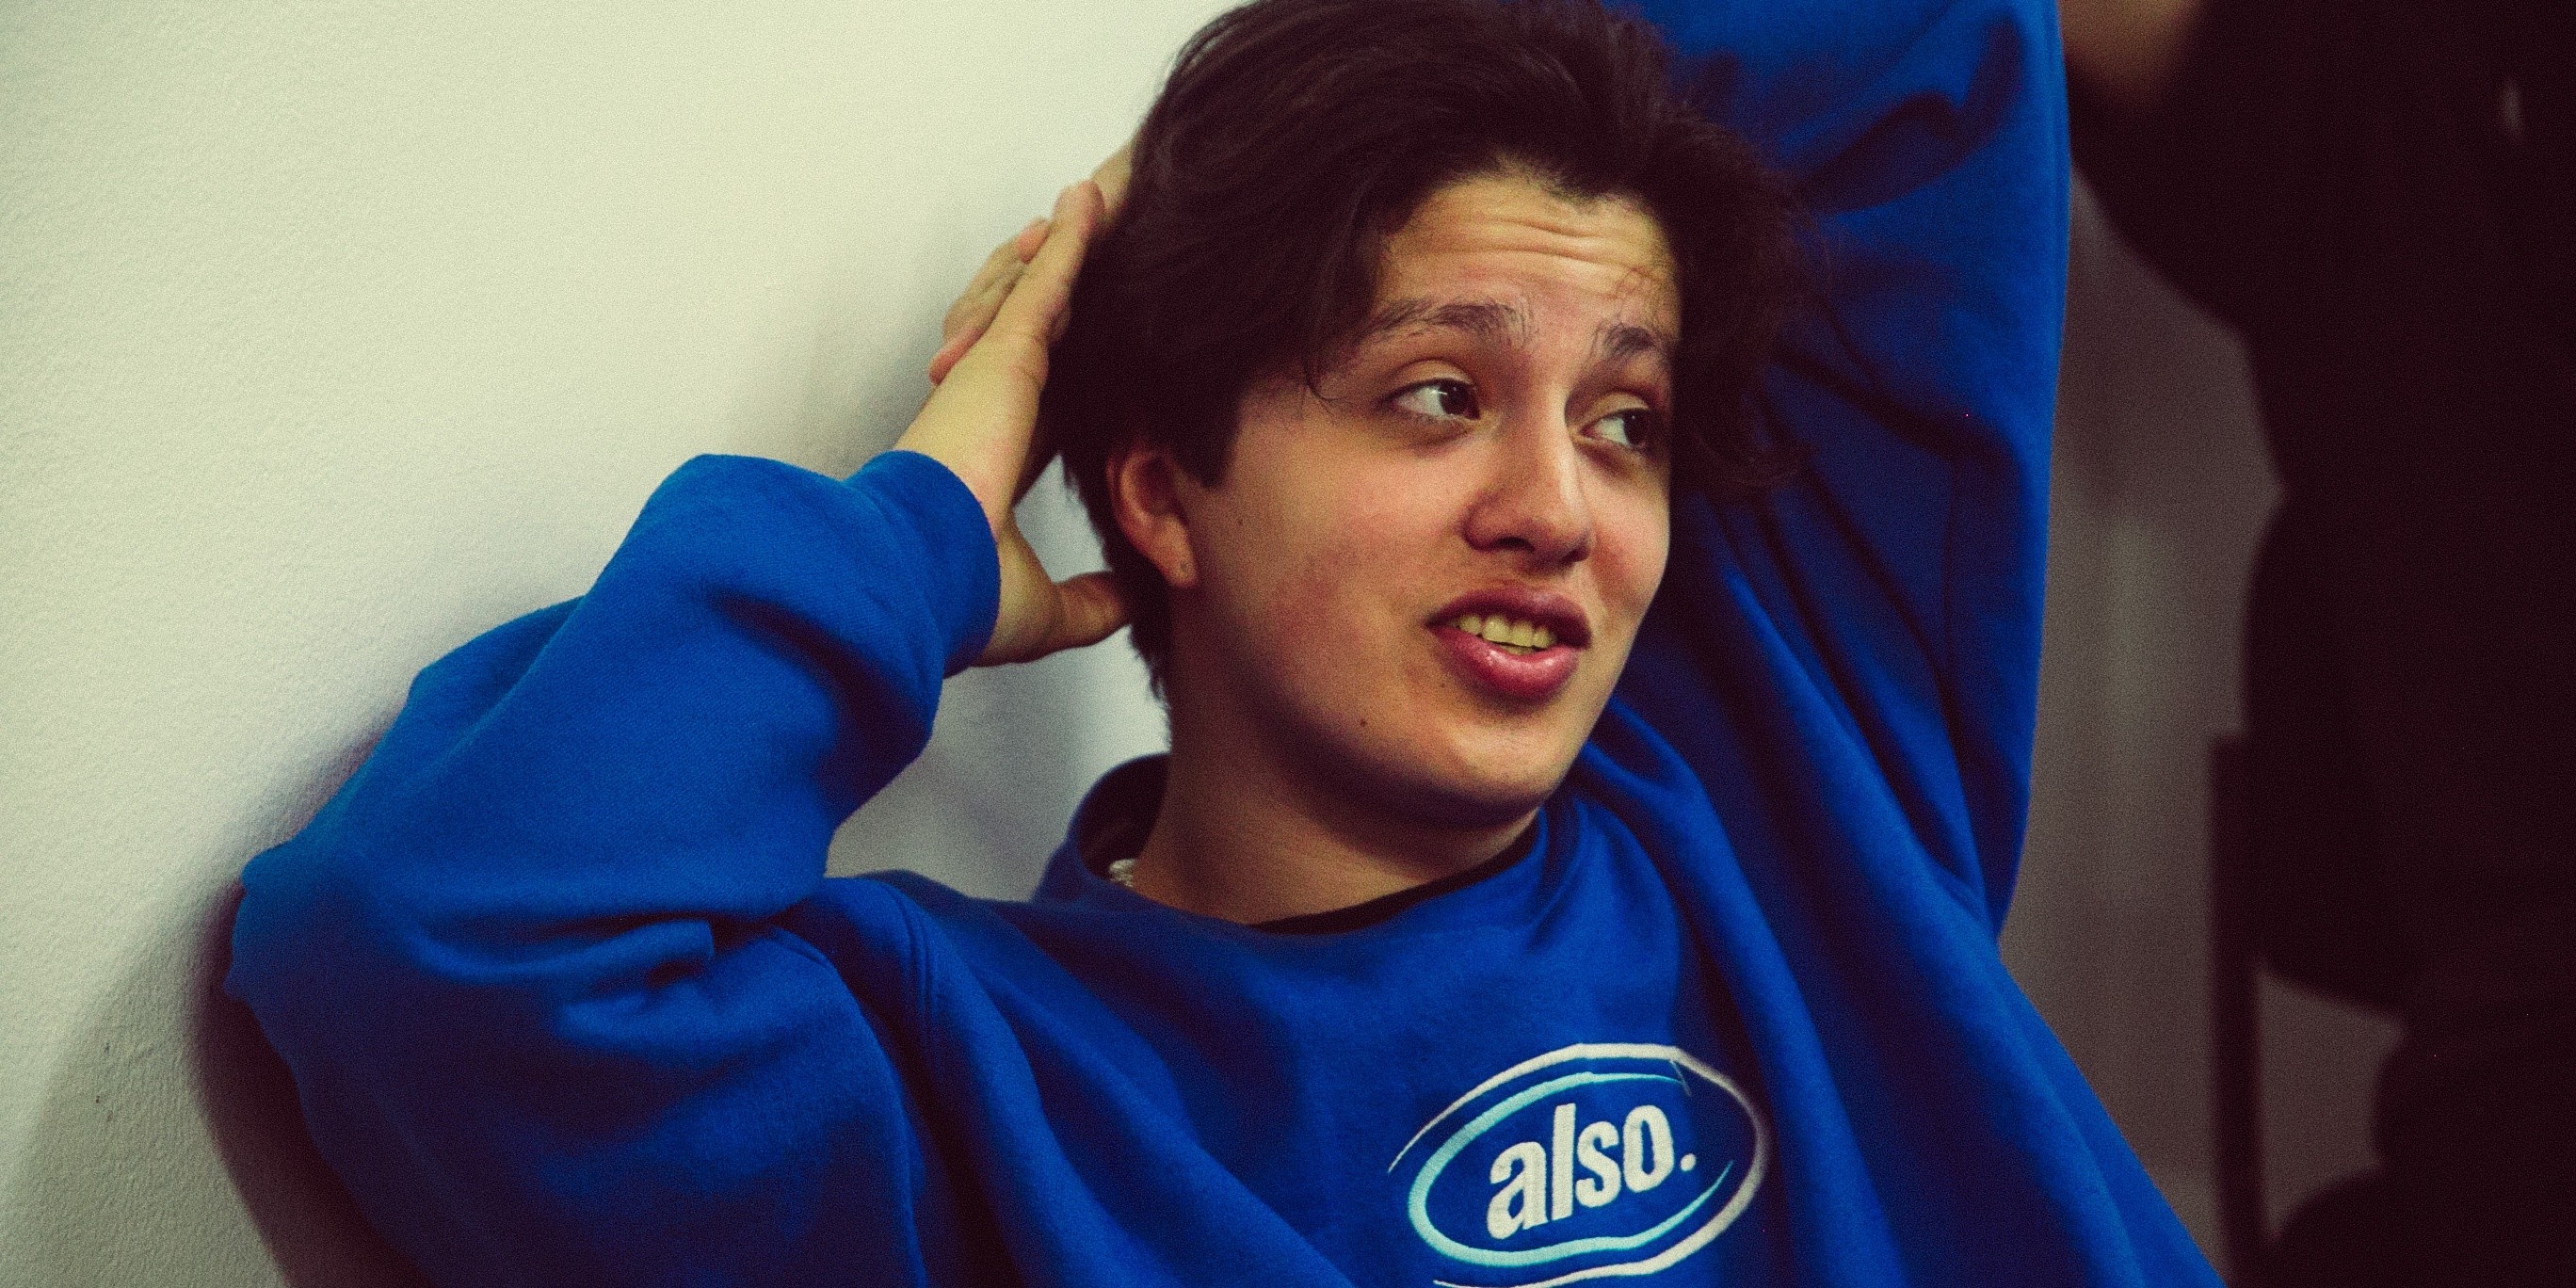 Boy Pablo and friends, on seeing the world together